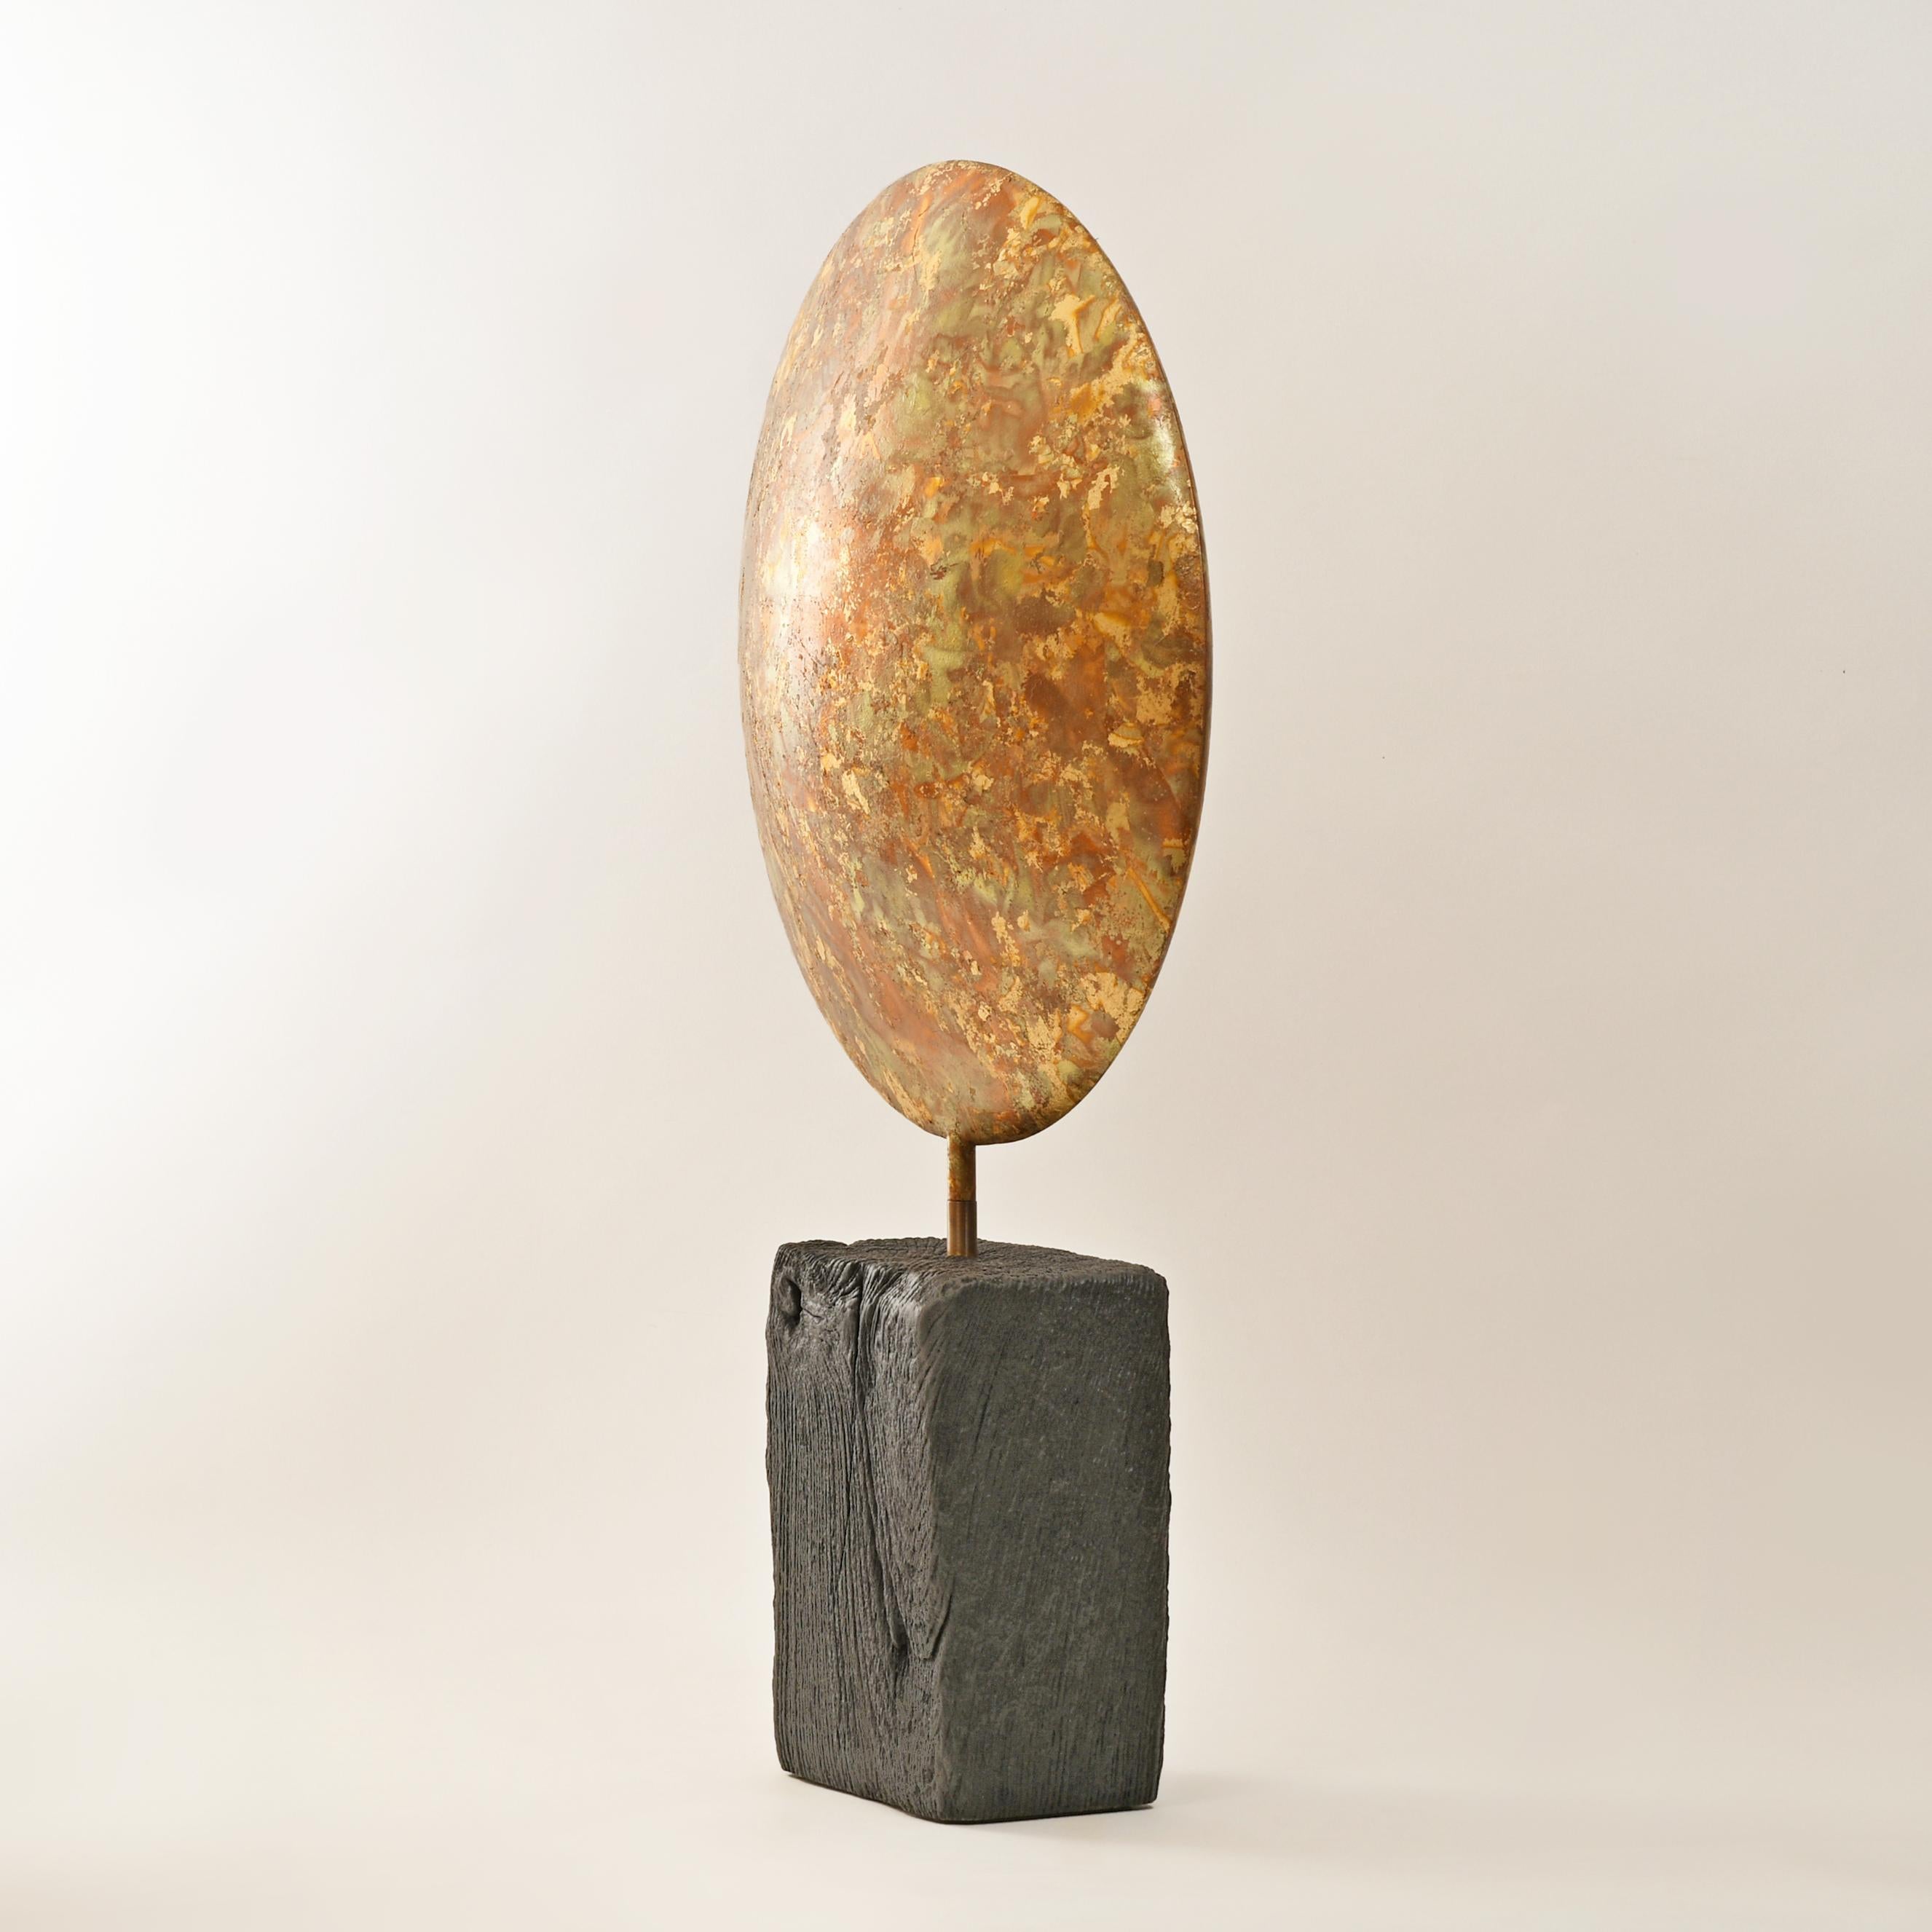 British Contemporary Sculpture by Philip Hearsey - Skyfire II For Sale 4